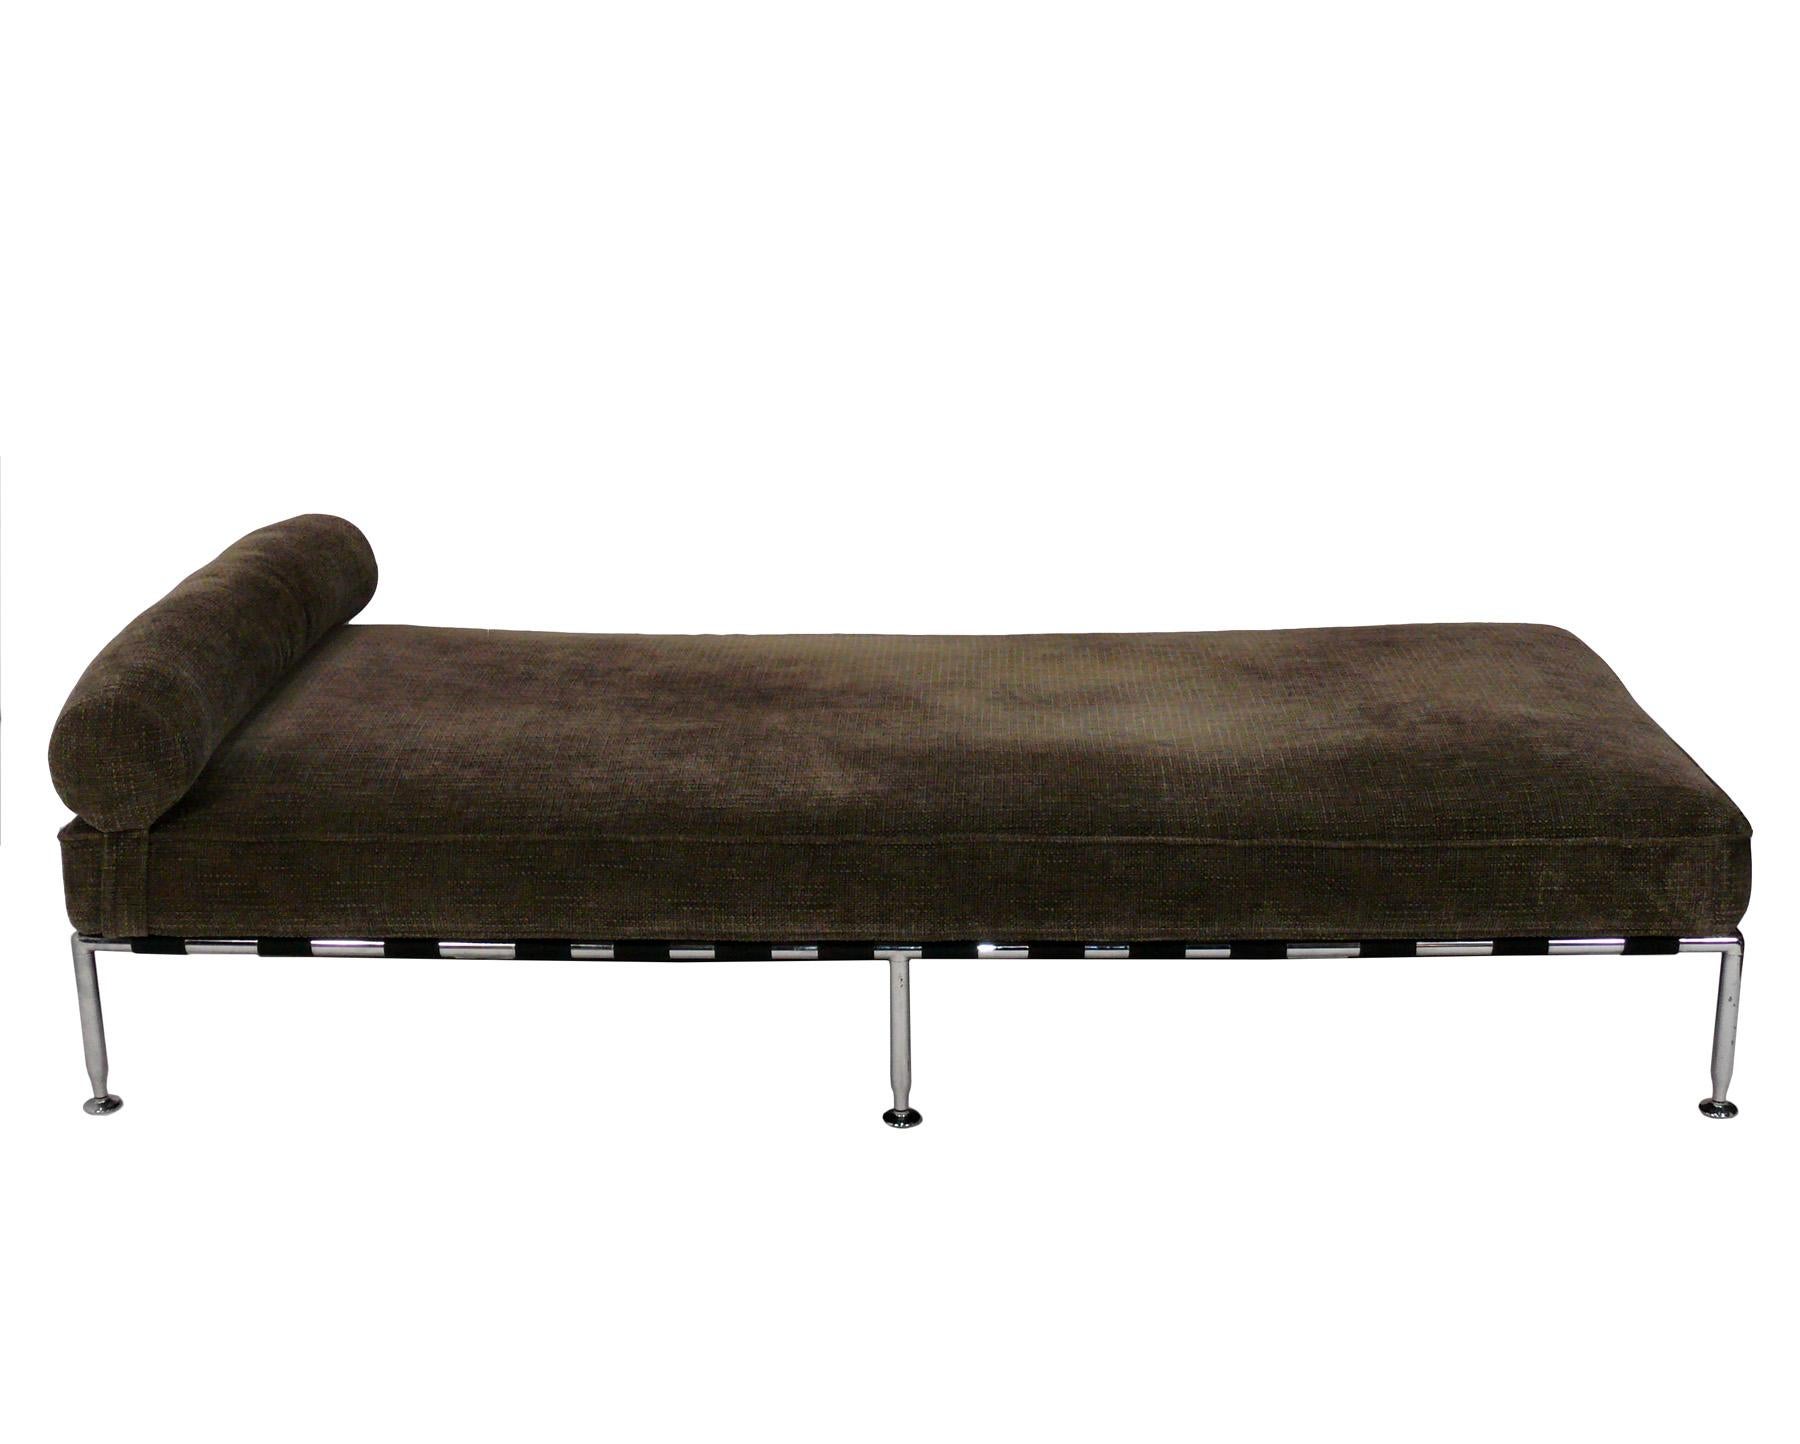 Clean Lined Italian Daybed or Bench, designed by Antonio Citterio for B&B Italia, Italy, circa 2000s. This daybed is currently being reupholstered and can be completed in your fabric. Simply send us 10 yards of your fabric after purchase.